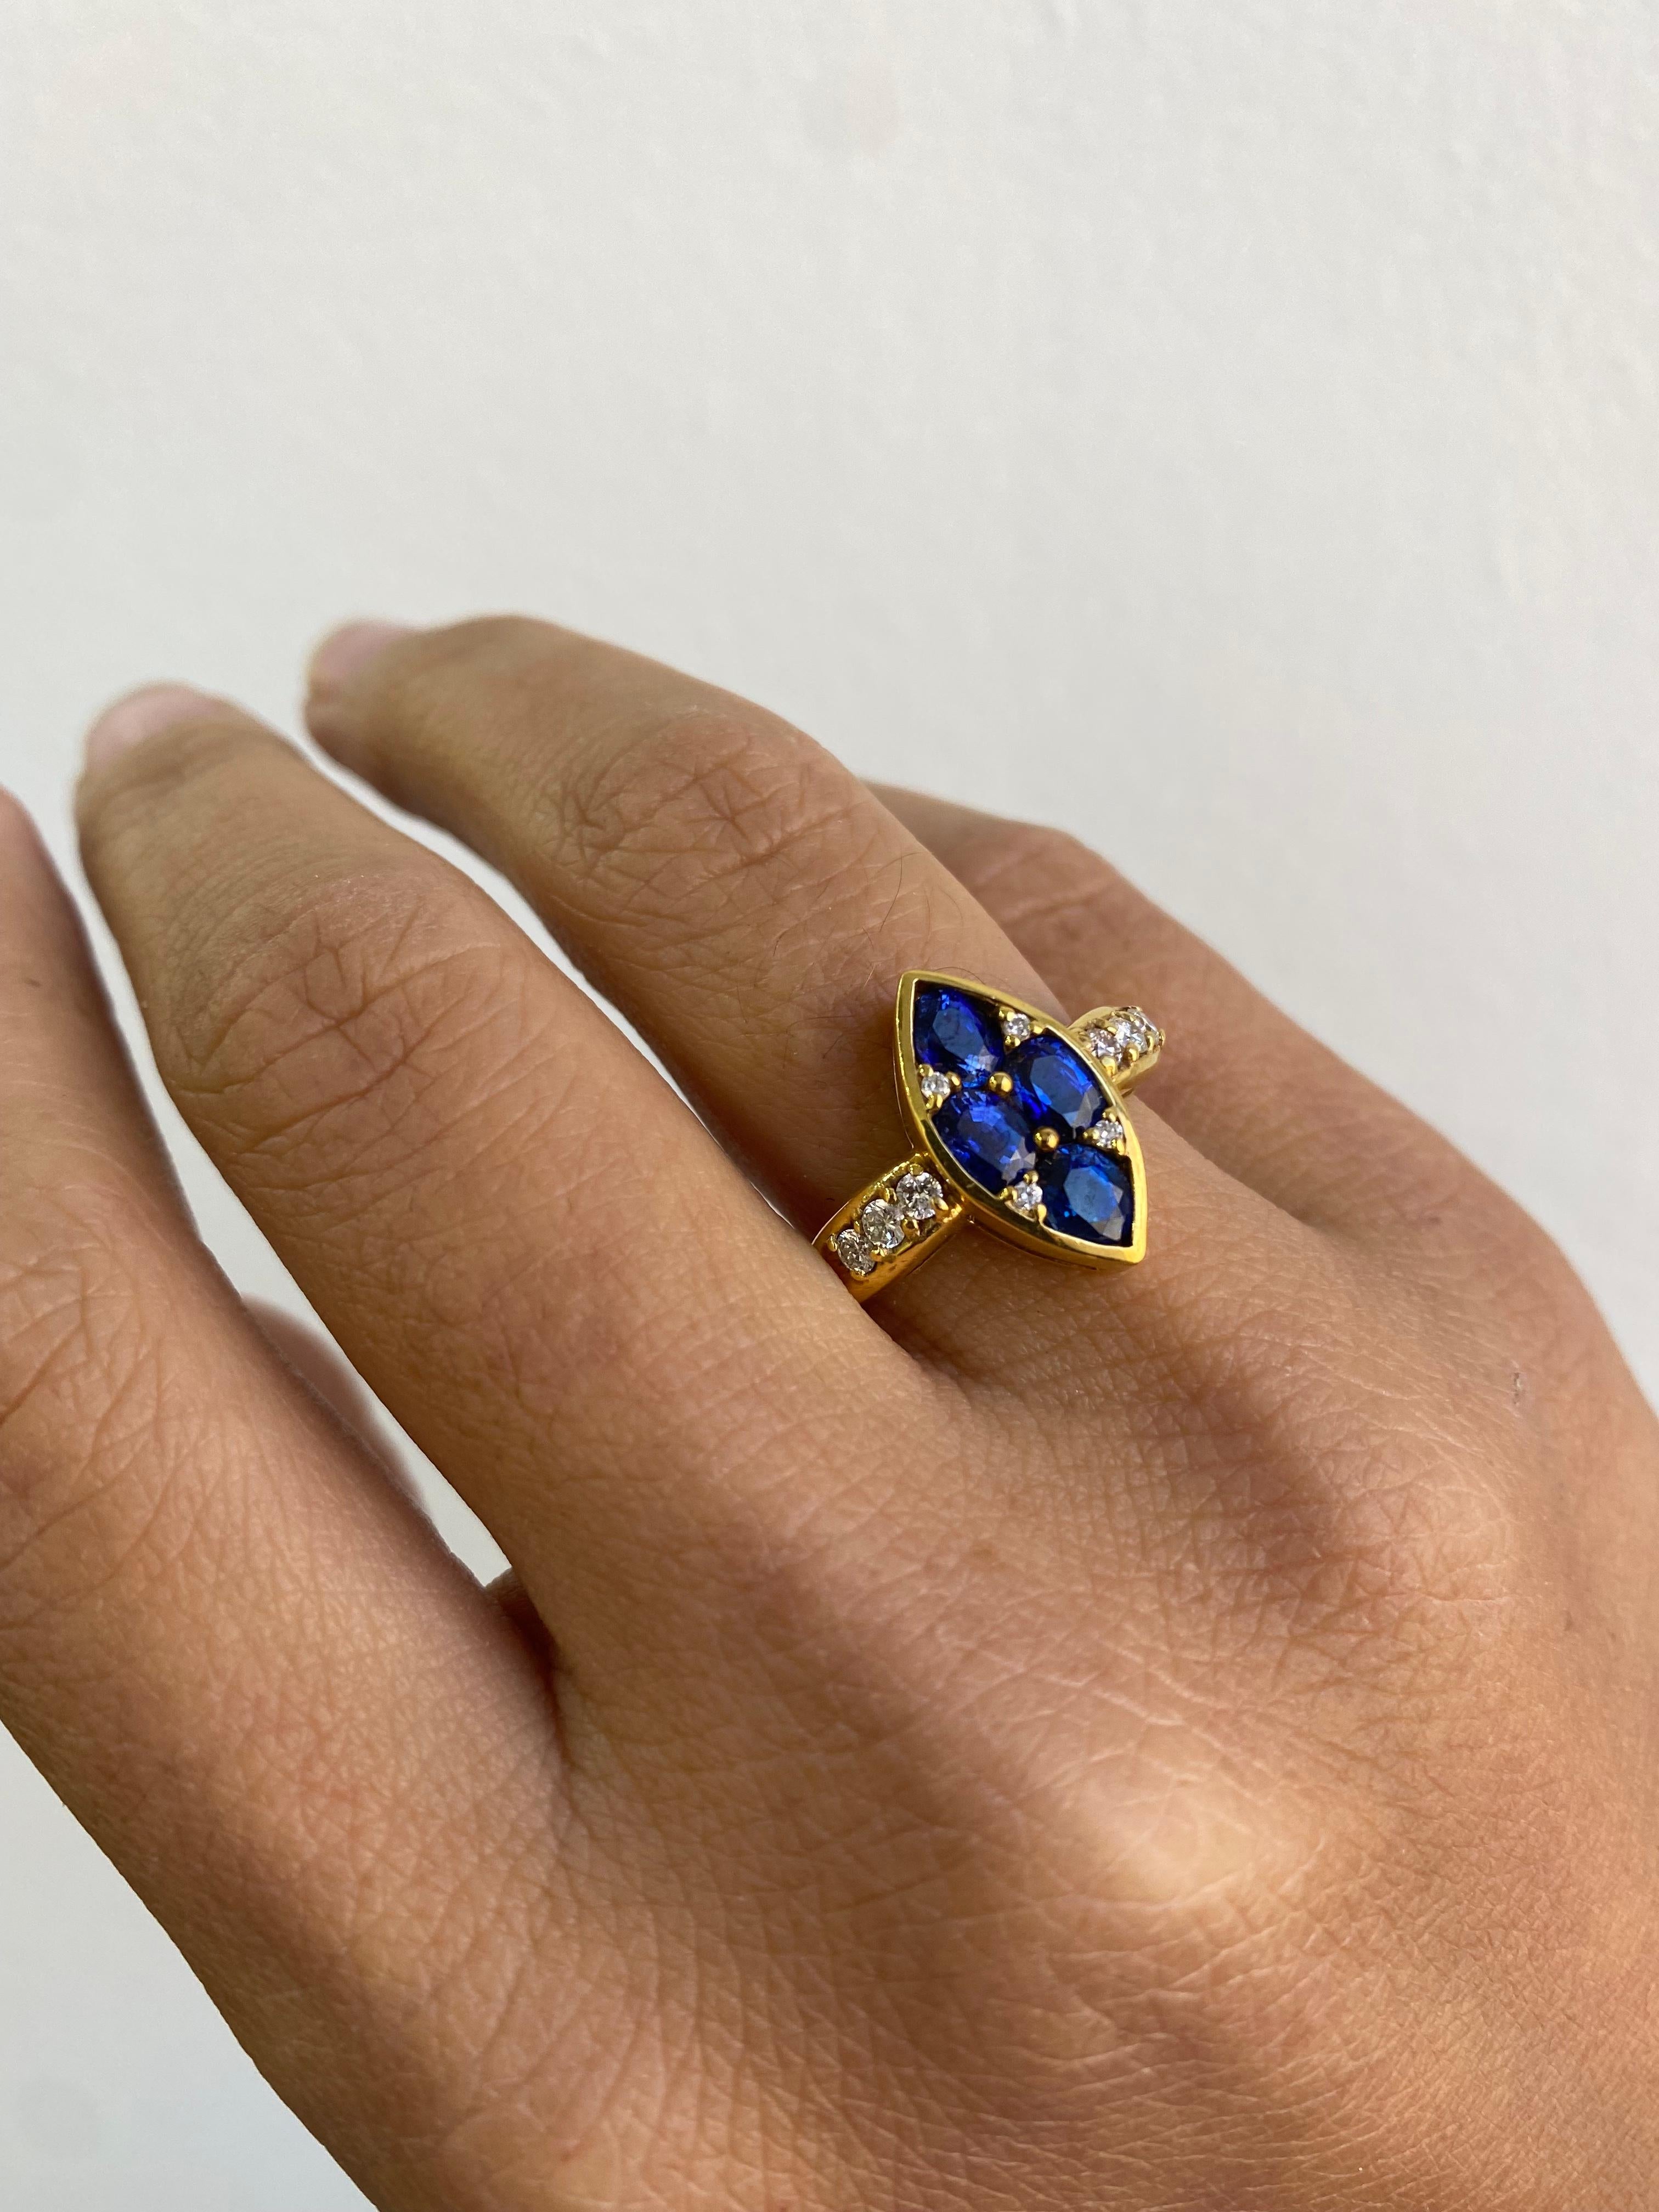 This unique piece features 4 vivid oval shaped natural blue sapphires designed into a marquee shape. Its gold band is set with pave diamonds and crafted in 14k yellow gold. 

Details: 
6 grams  14k yellow gold
10 round brilliant cut diamonds set